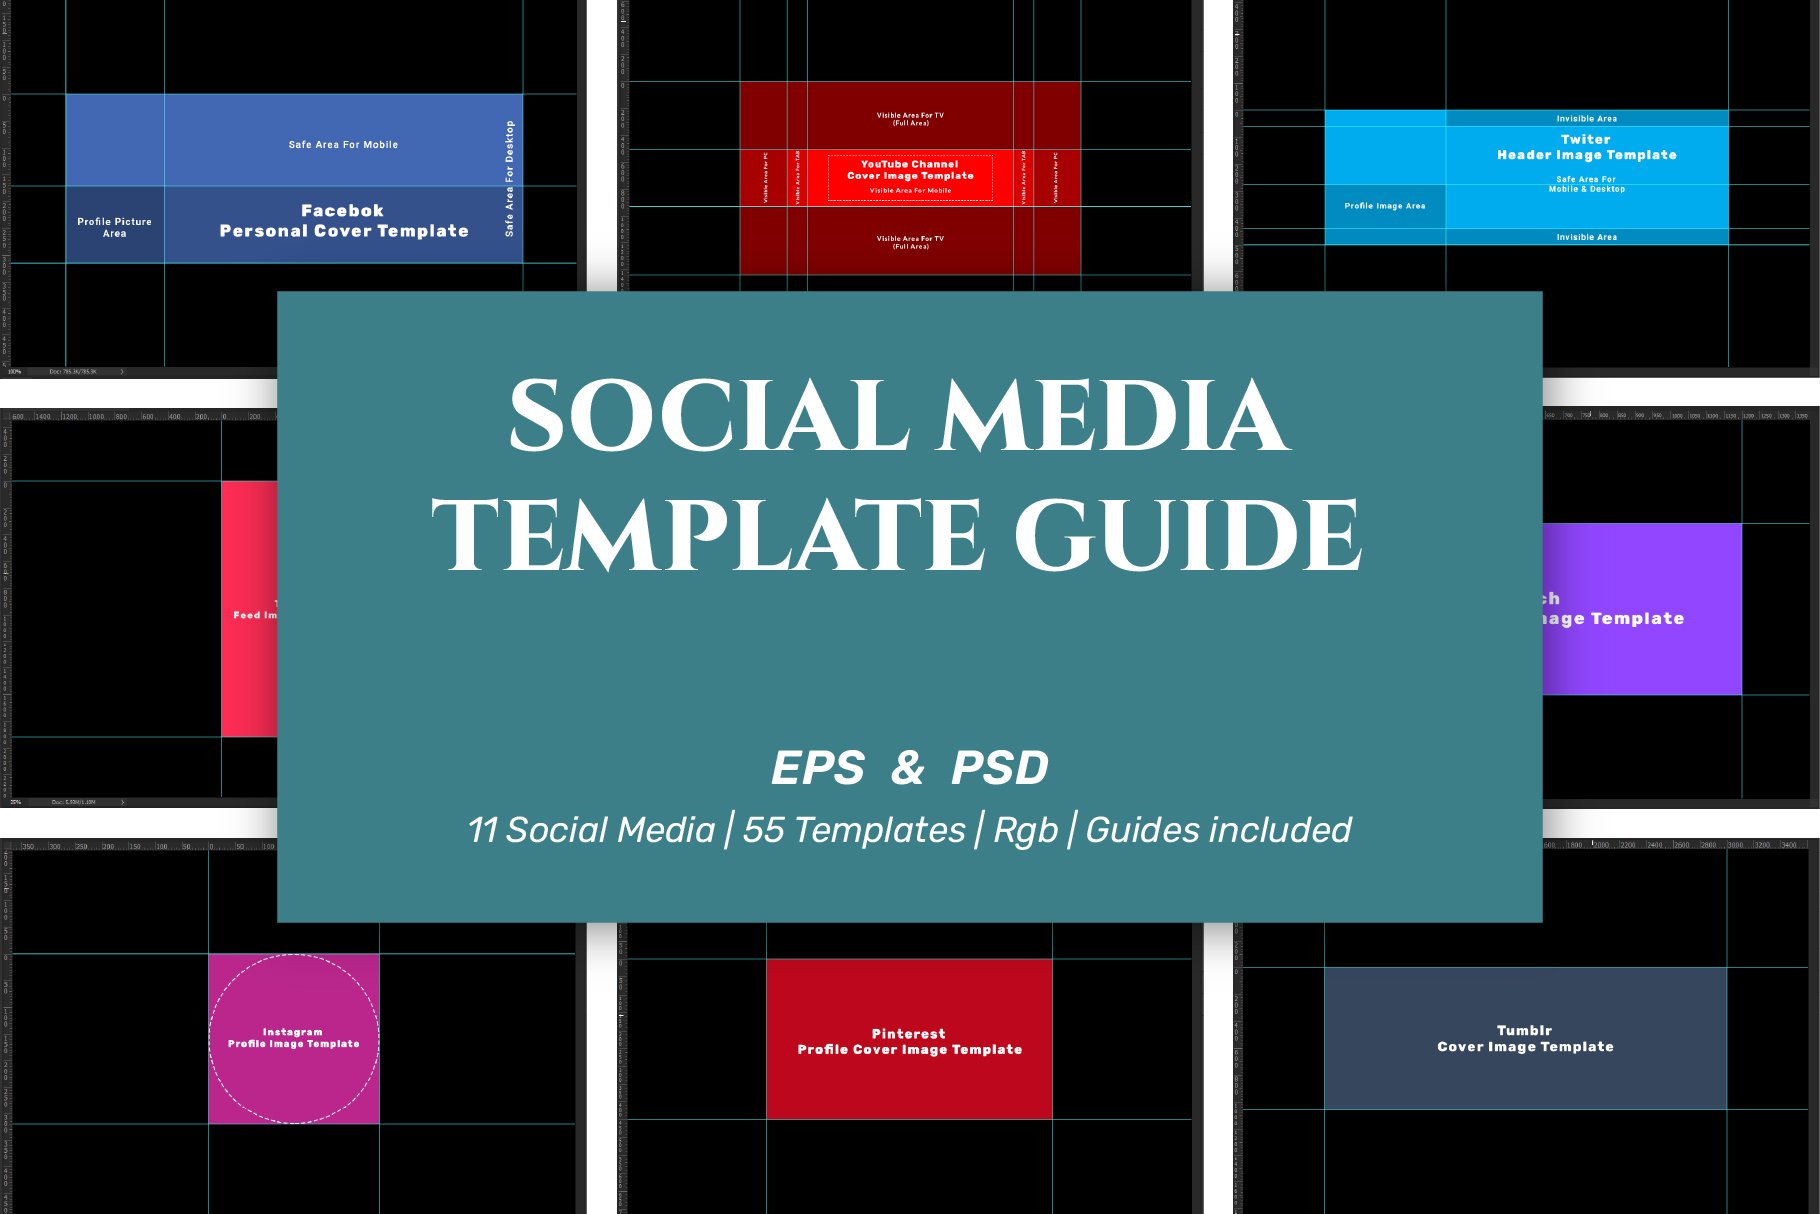 Social Media Template Guide cover image.